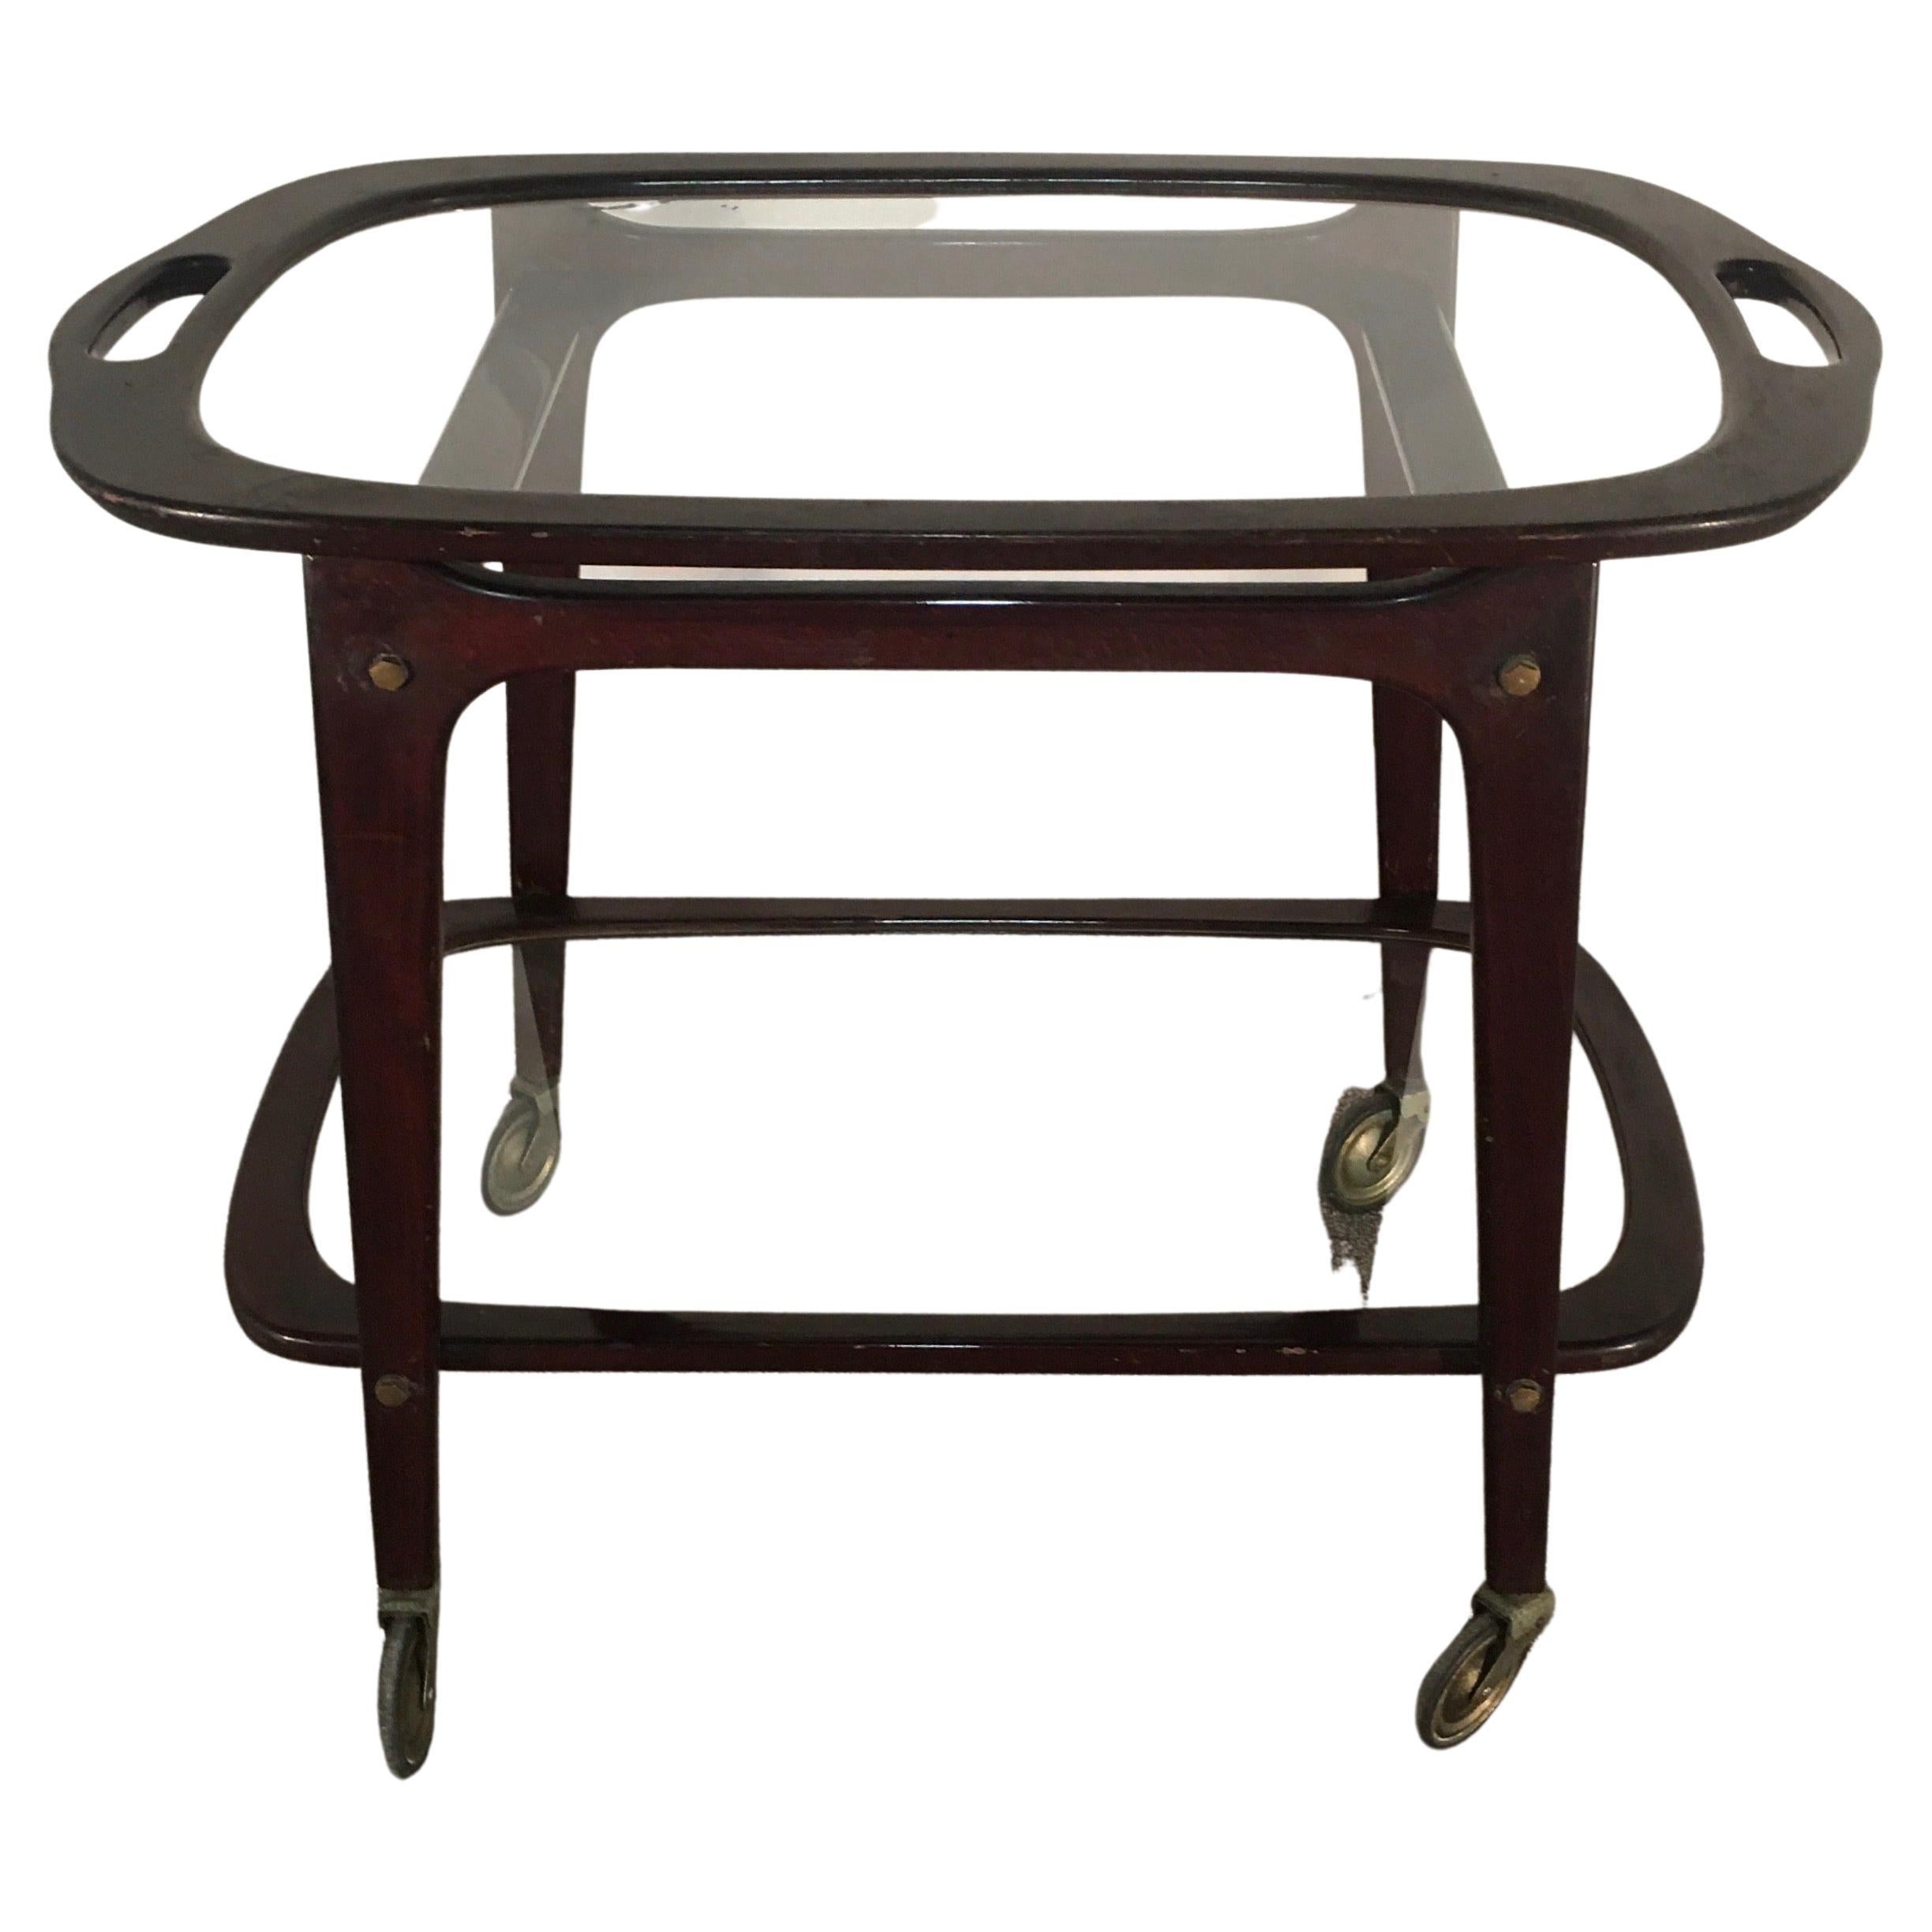 Serving Bar Cart by Cesare Lacca, Italy 1950s